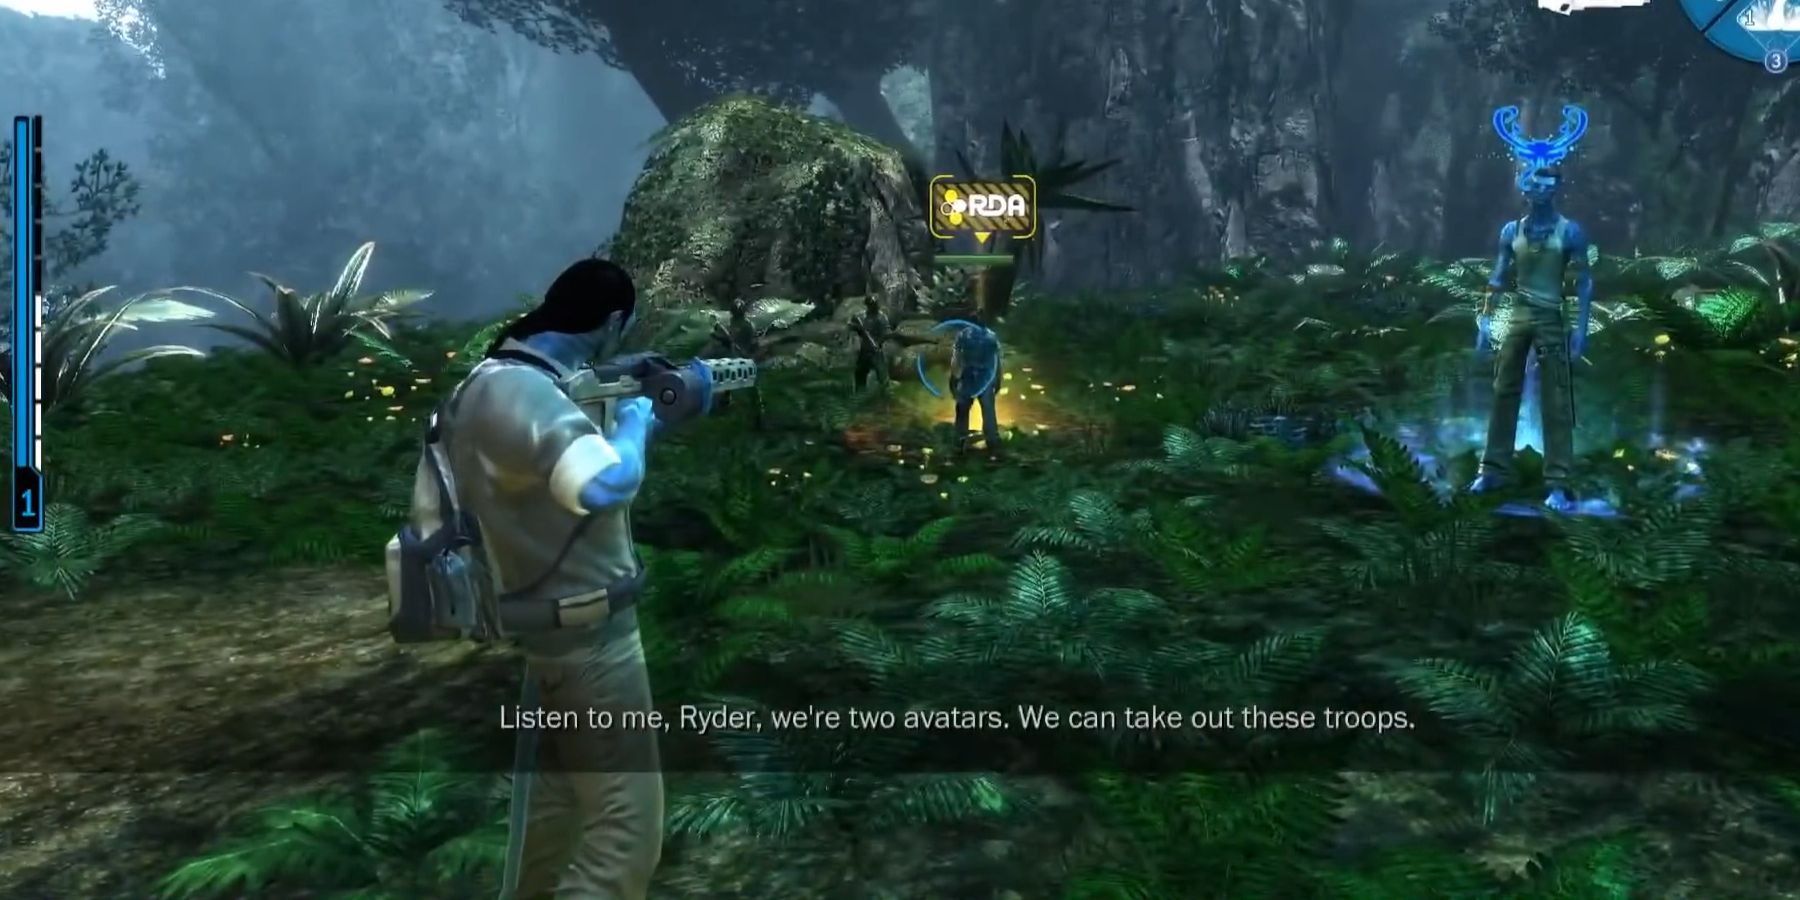 A soldier in a Na'Vi Avatar pointing his gun at an RDA soldier and a Na'Vi. Image source: Minimme on YouTube